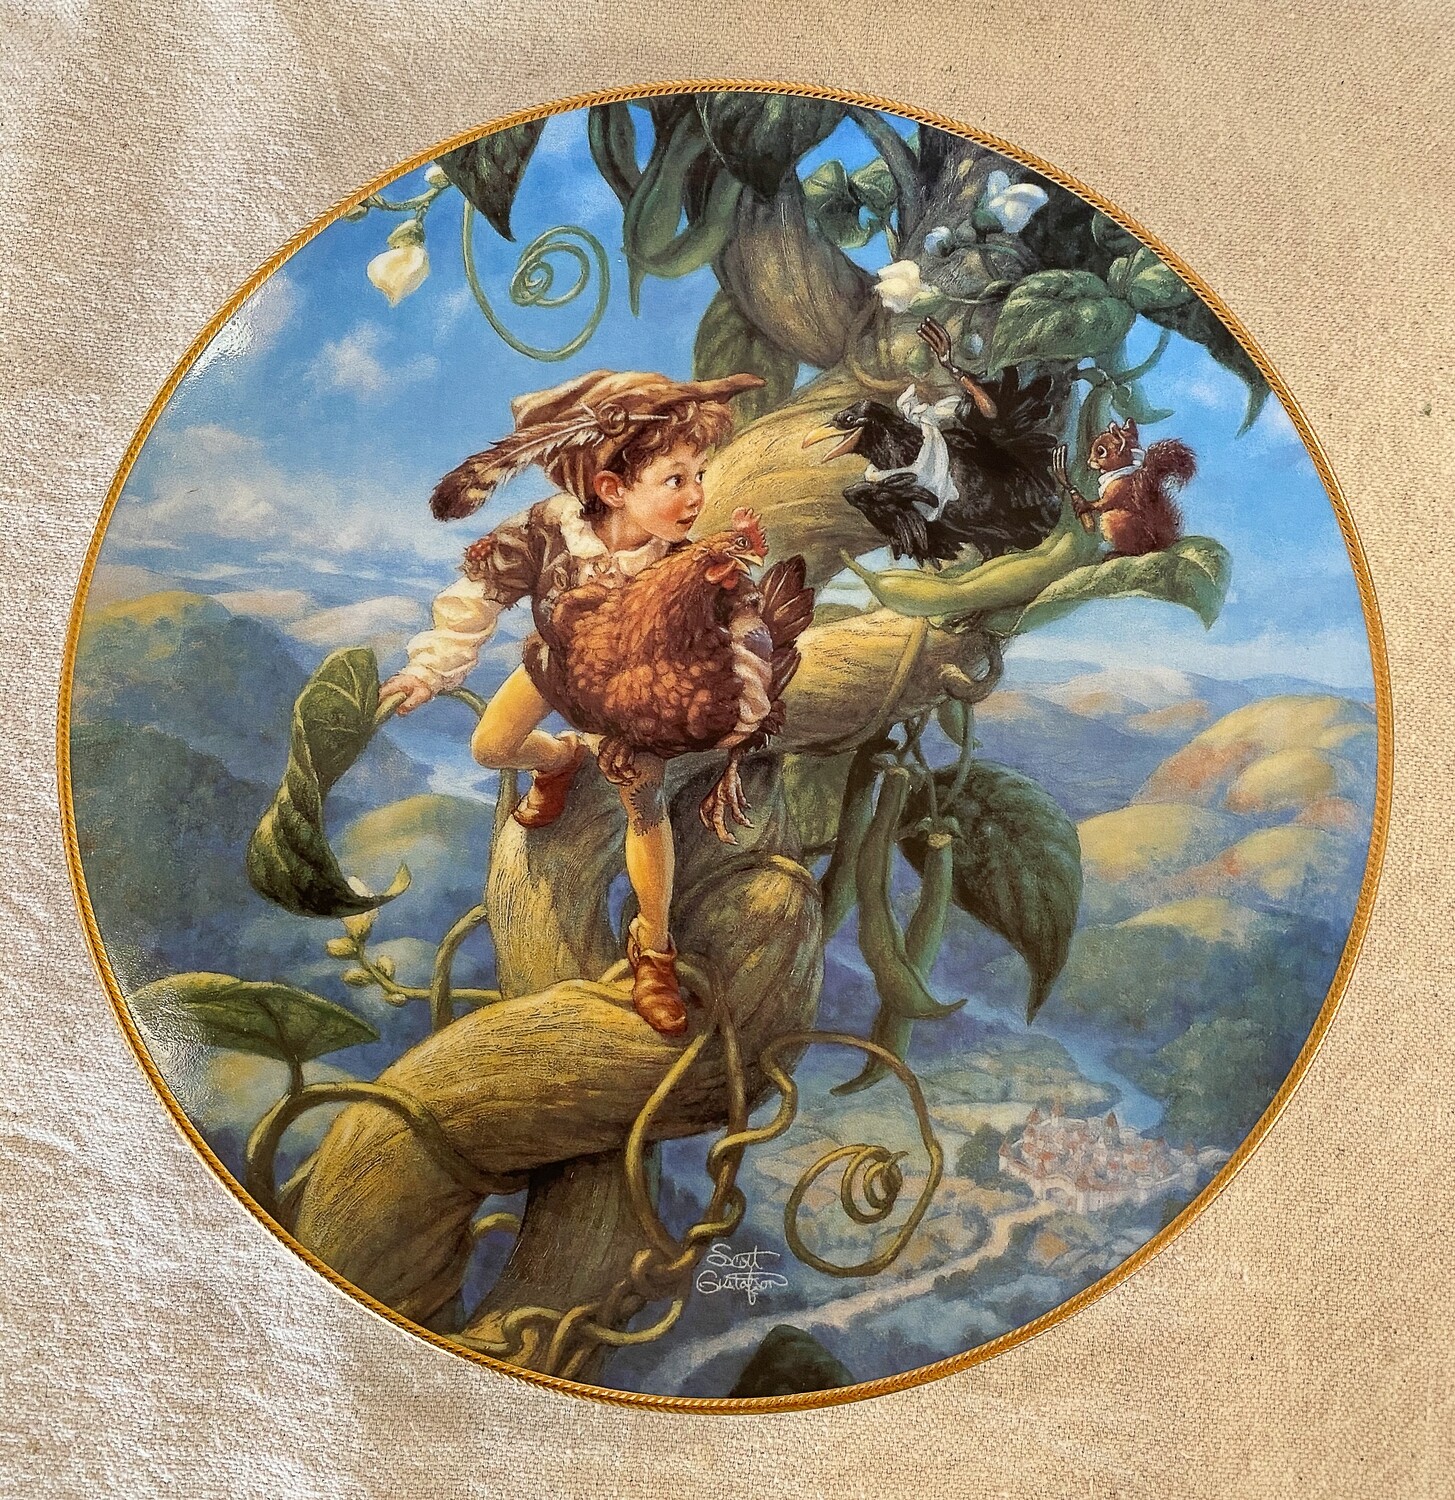 1992 Jack and the Beanstalk Collector Plate by Knowles Scott Gustafson